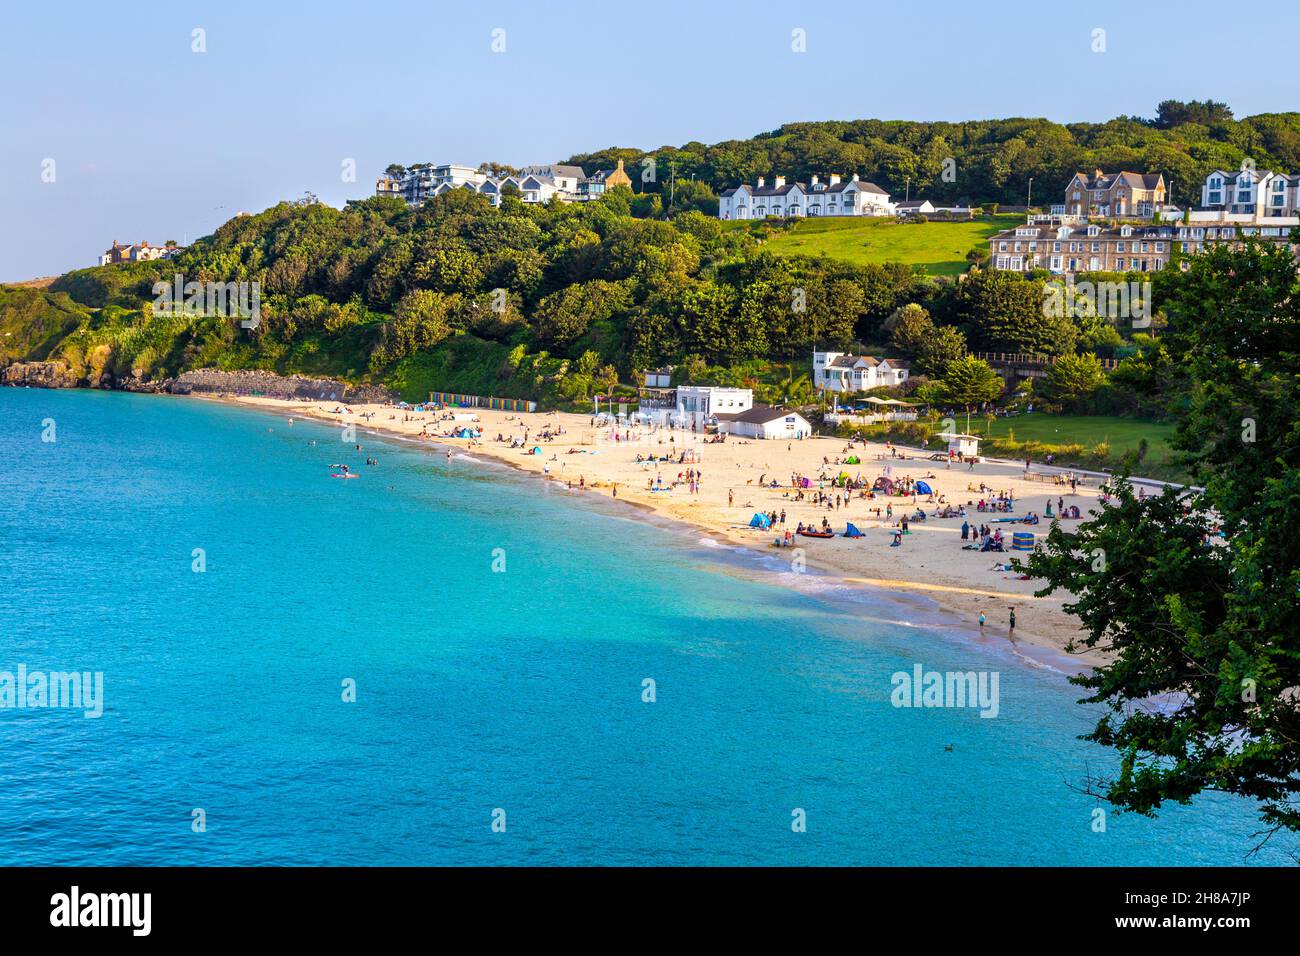 People enjoying a sunny day at Porthminster Beach, St Ives, Cornwall, UK Stock Photo